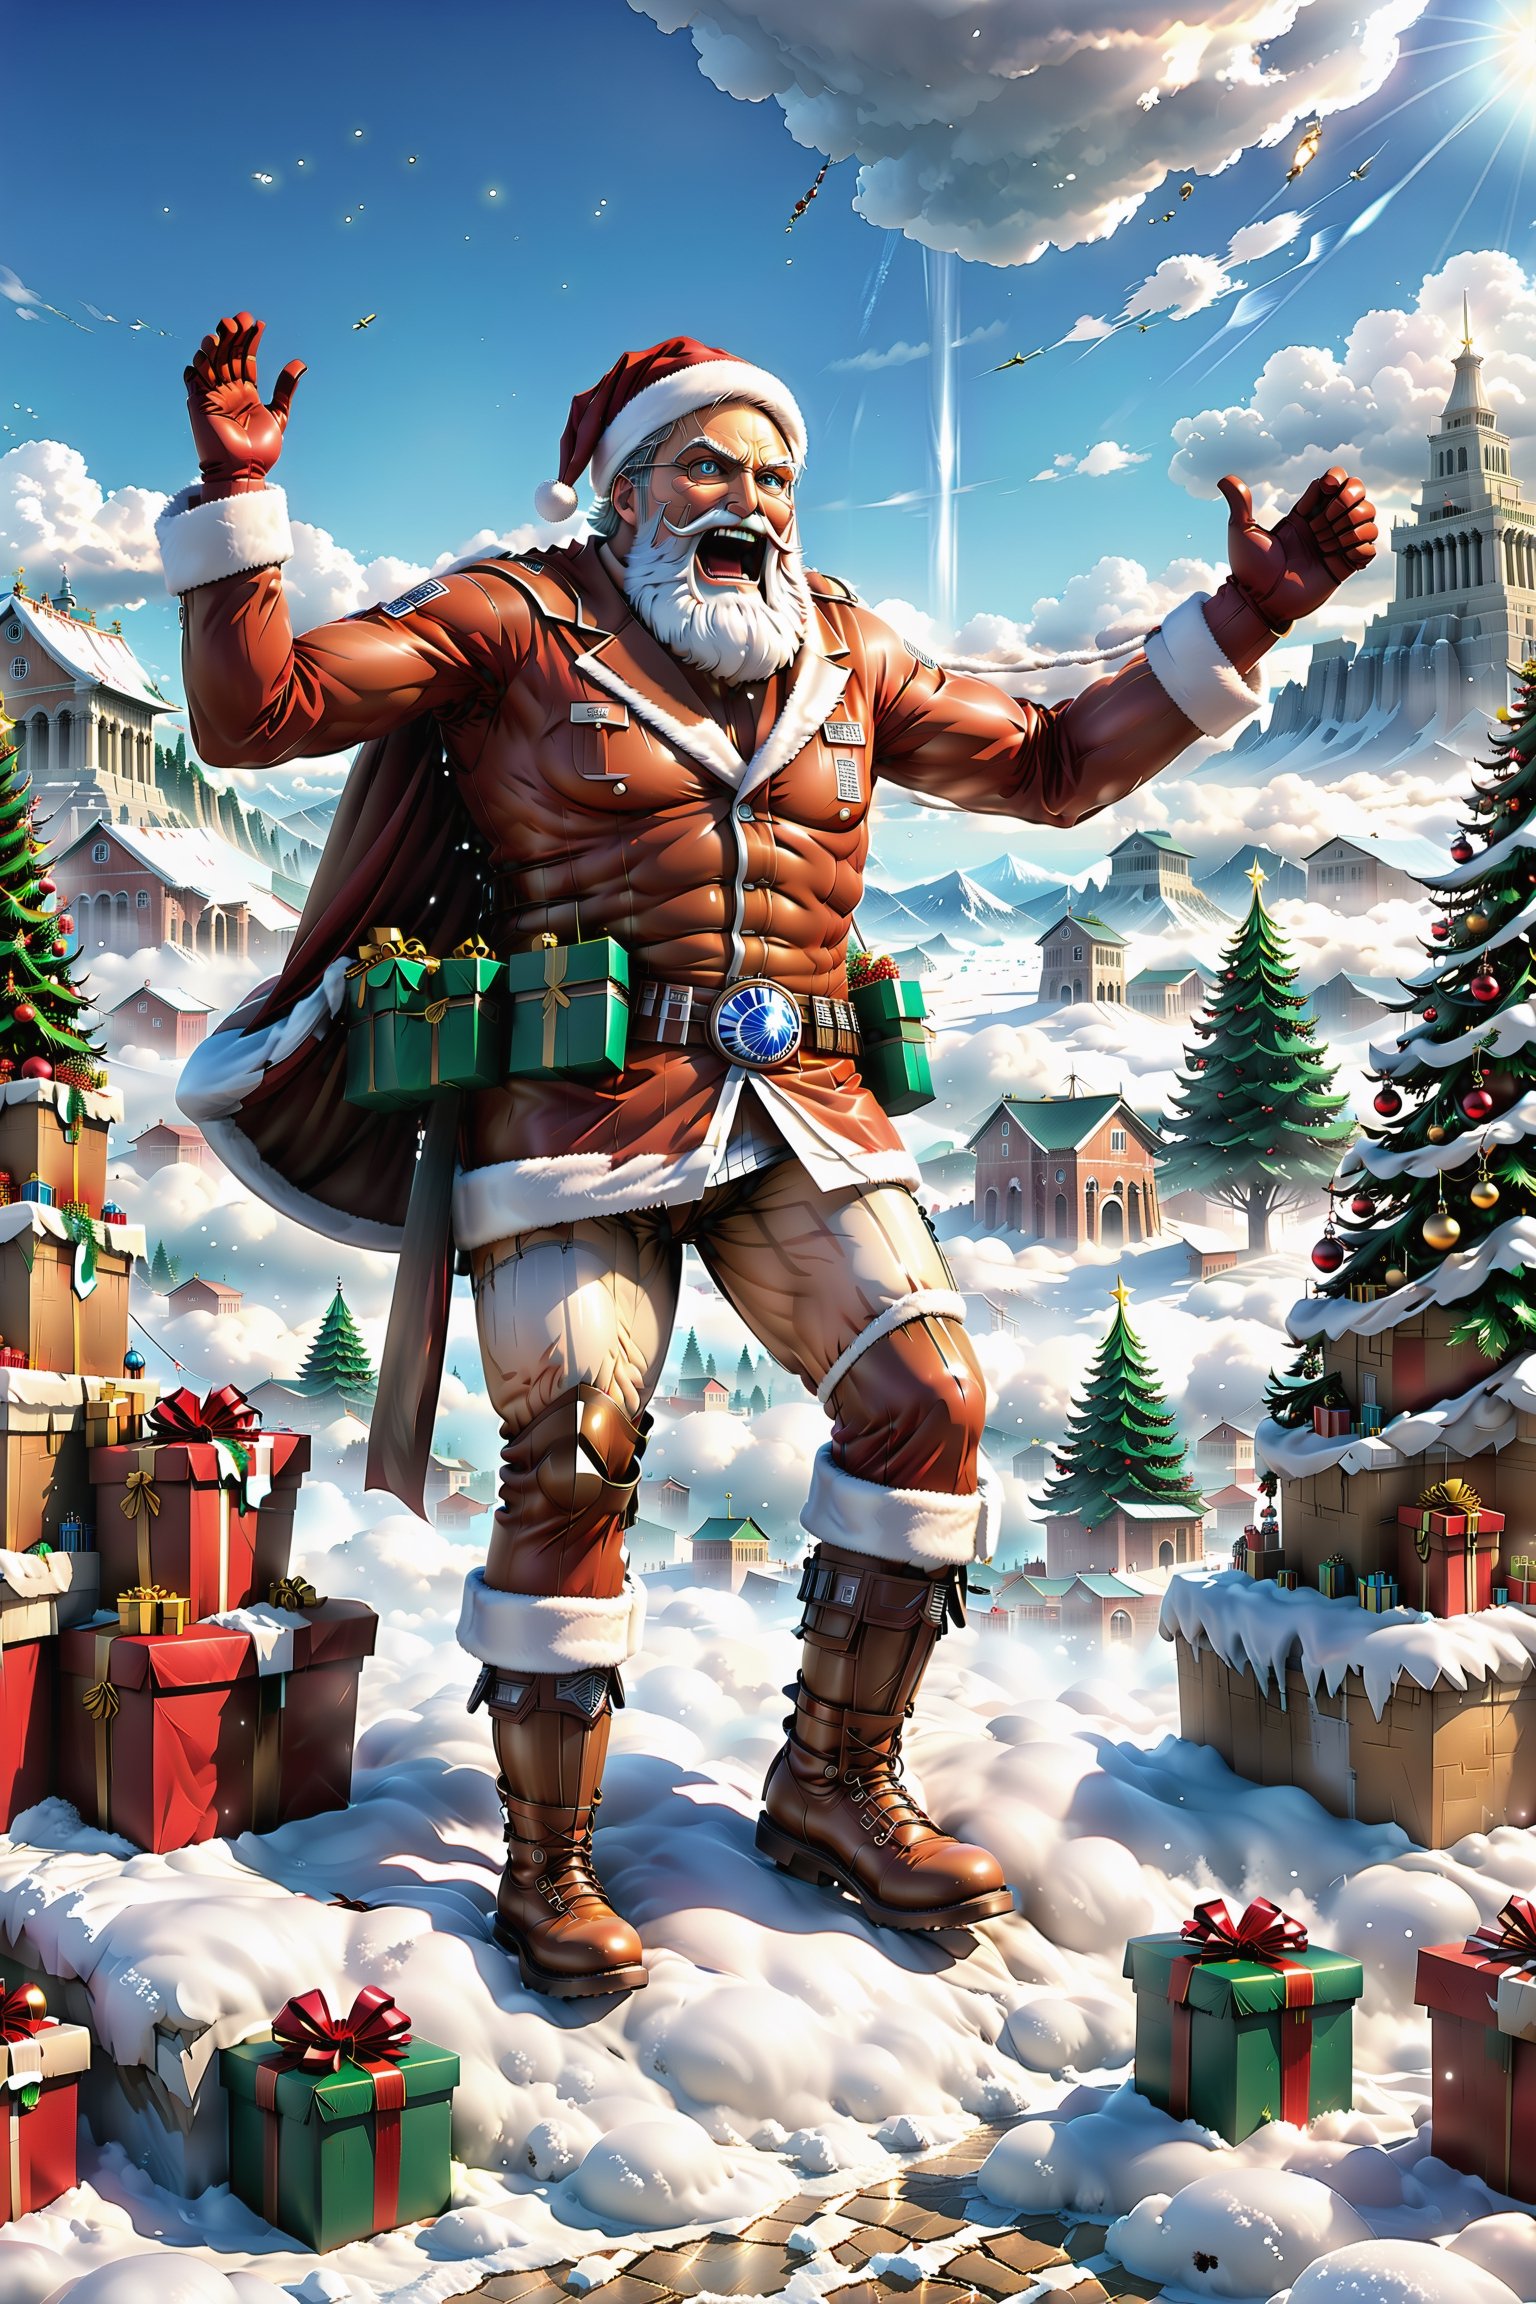 Santa Claus takes on a whole new look in this jaw-dropping scene as he rides atop a massive and imposing {(((attack on titan)))}, blending traditional Christmas elements with trendy anime elements.

The giant towers over the clouds, clad in Christmas decorations, with a huge red Santa hat flopping over his head, and probably covered in colored lights and gift boxes, adding color to the scene. Santa Claus sits on the giant's shoulders, waving a special giant Christmas stocking in his hand, as if delivering Christmas wishes to children all over the world.

The expression on the giant's face may be jolly and warm, complementing the pleasant atmosphere of Santa Claus. His body may also be adorned with some Christmas wreaths, and his huge paws step on a patch of snow, leaving deep imprints.

The background might be a cold winter day with snowflakes fluttering in the air. Or there may be some other Christmas elements around, such as snowmen and Christmas trees, creating a scene full of laughter and blessings.

The whole picture is full of creativity and vigor, combining the image of Santa Claus with elements of pop culture to present an eye-catching fantasy picture.